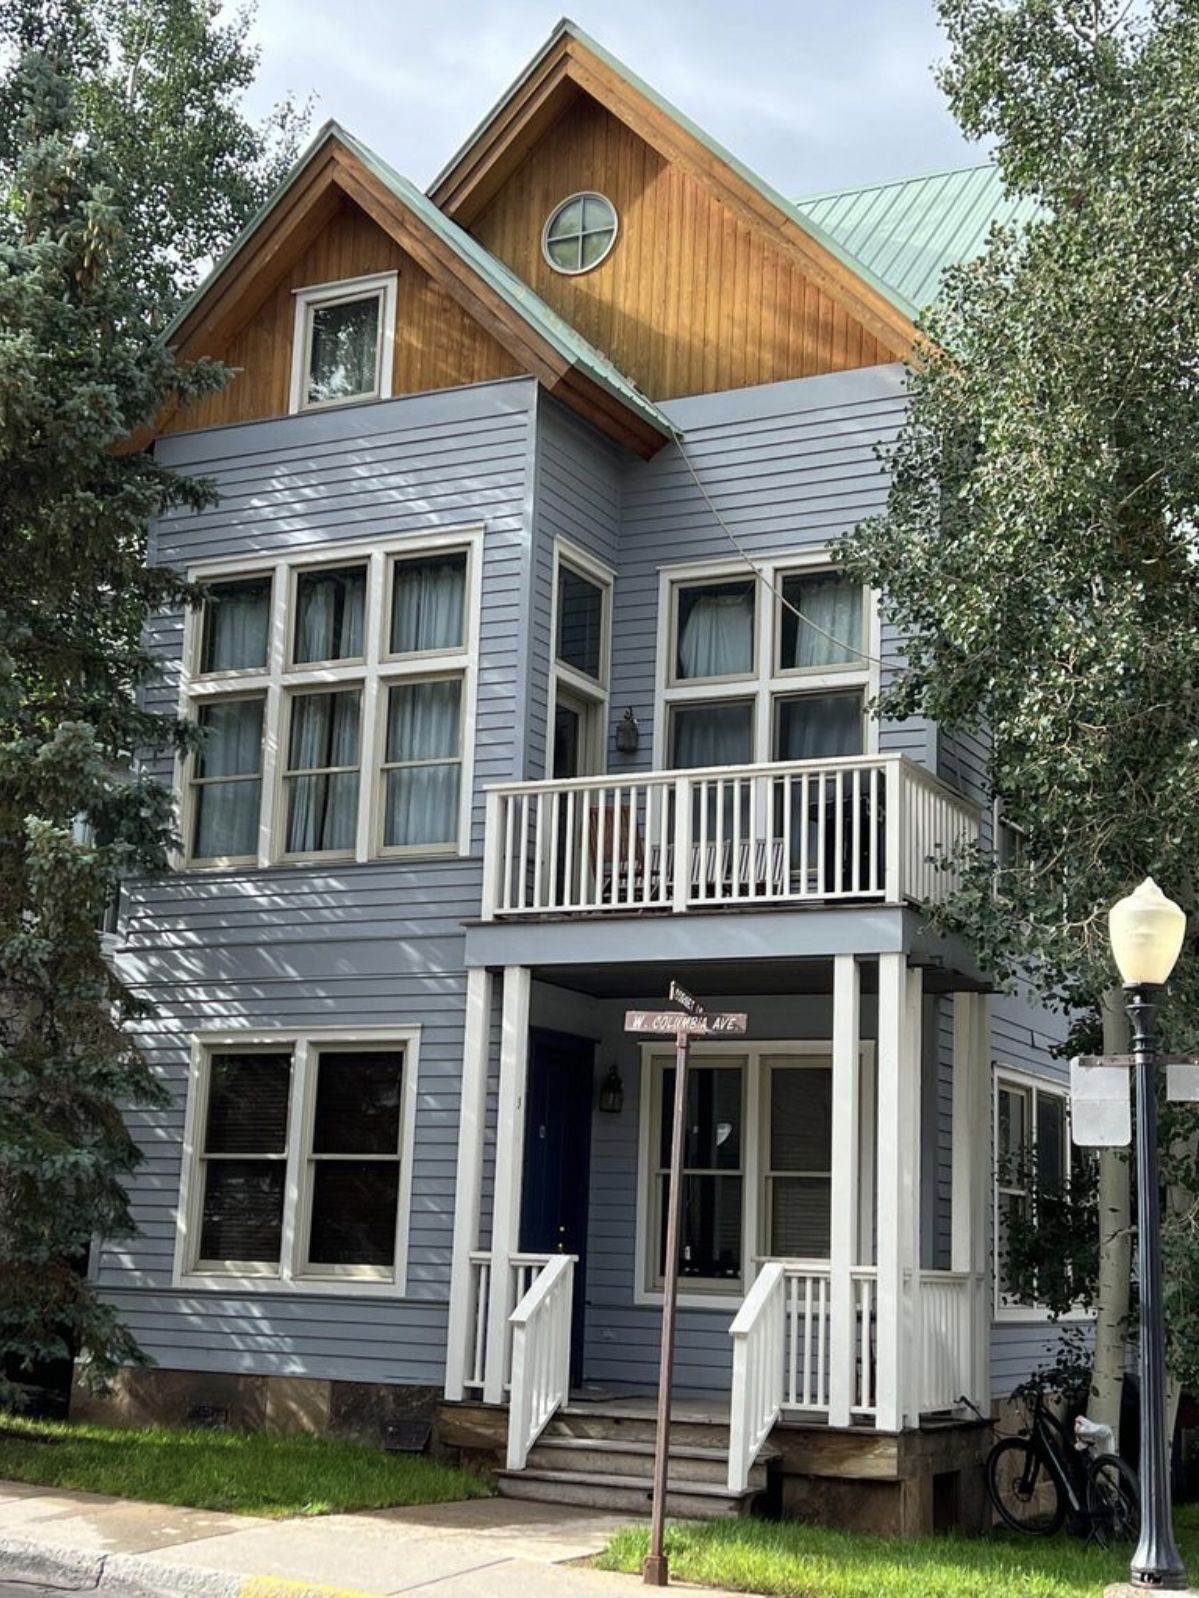 Duplex Homes for Active at 658 W Columbia Avenue, Telluride, CO, 81435 658 W Columbia Avenue Telluride, Colorado 81435 United States